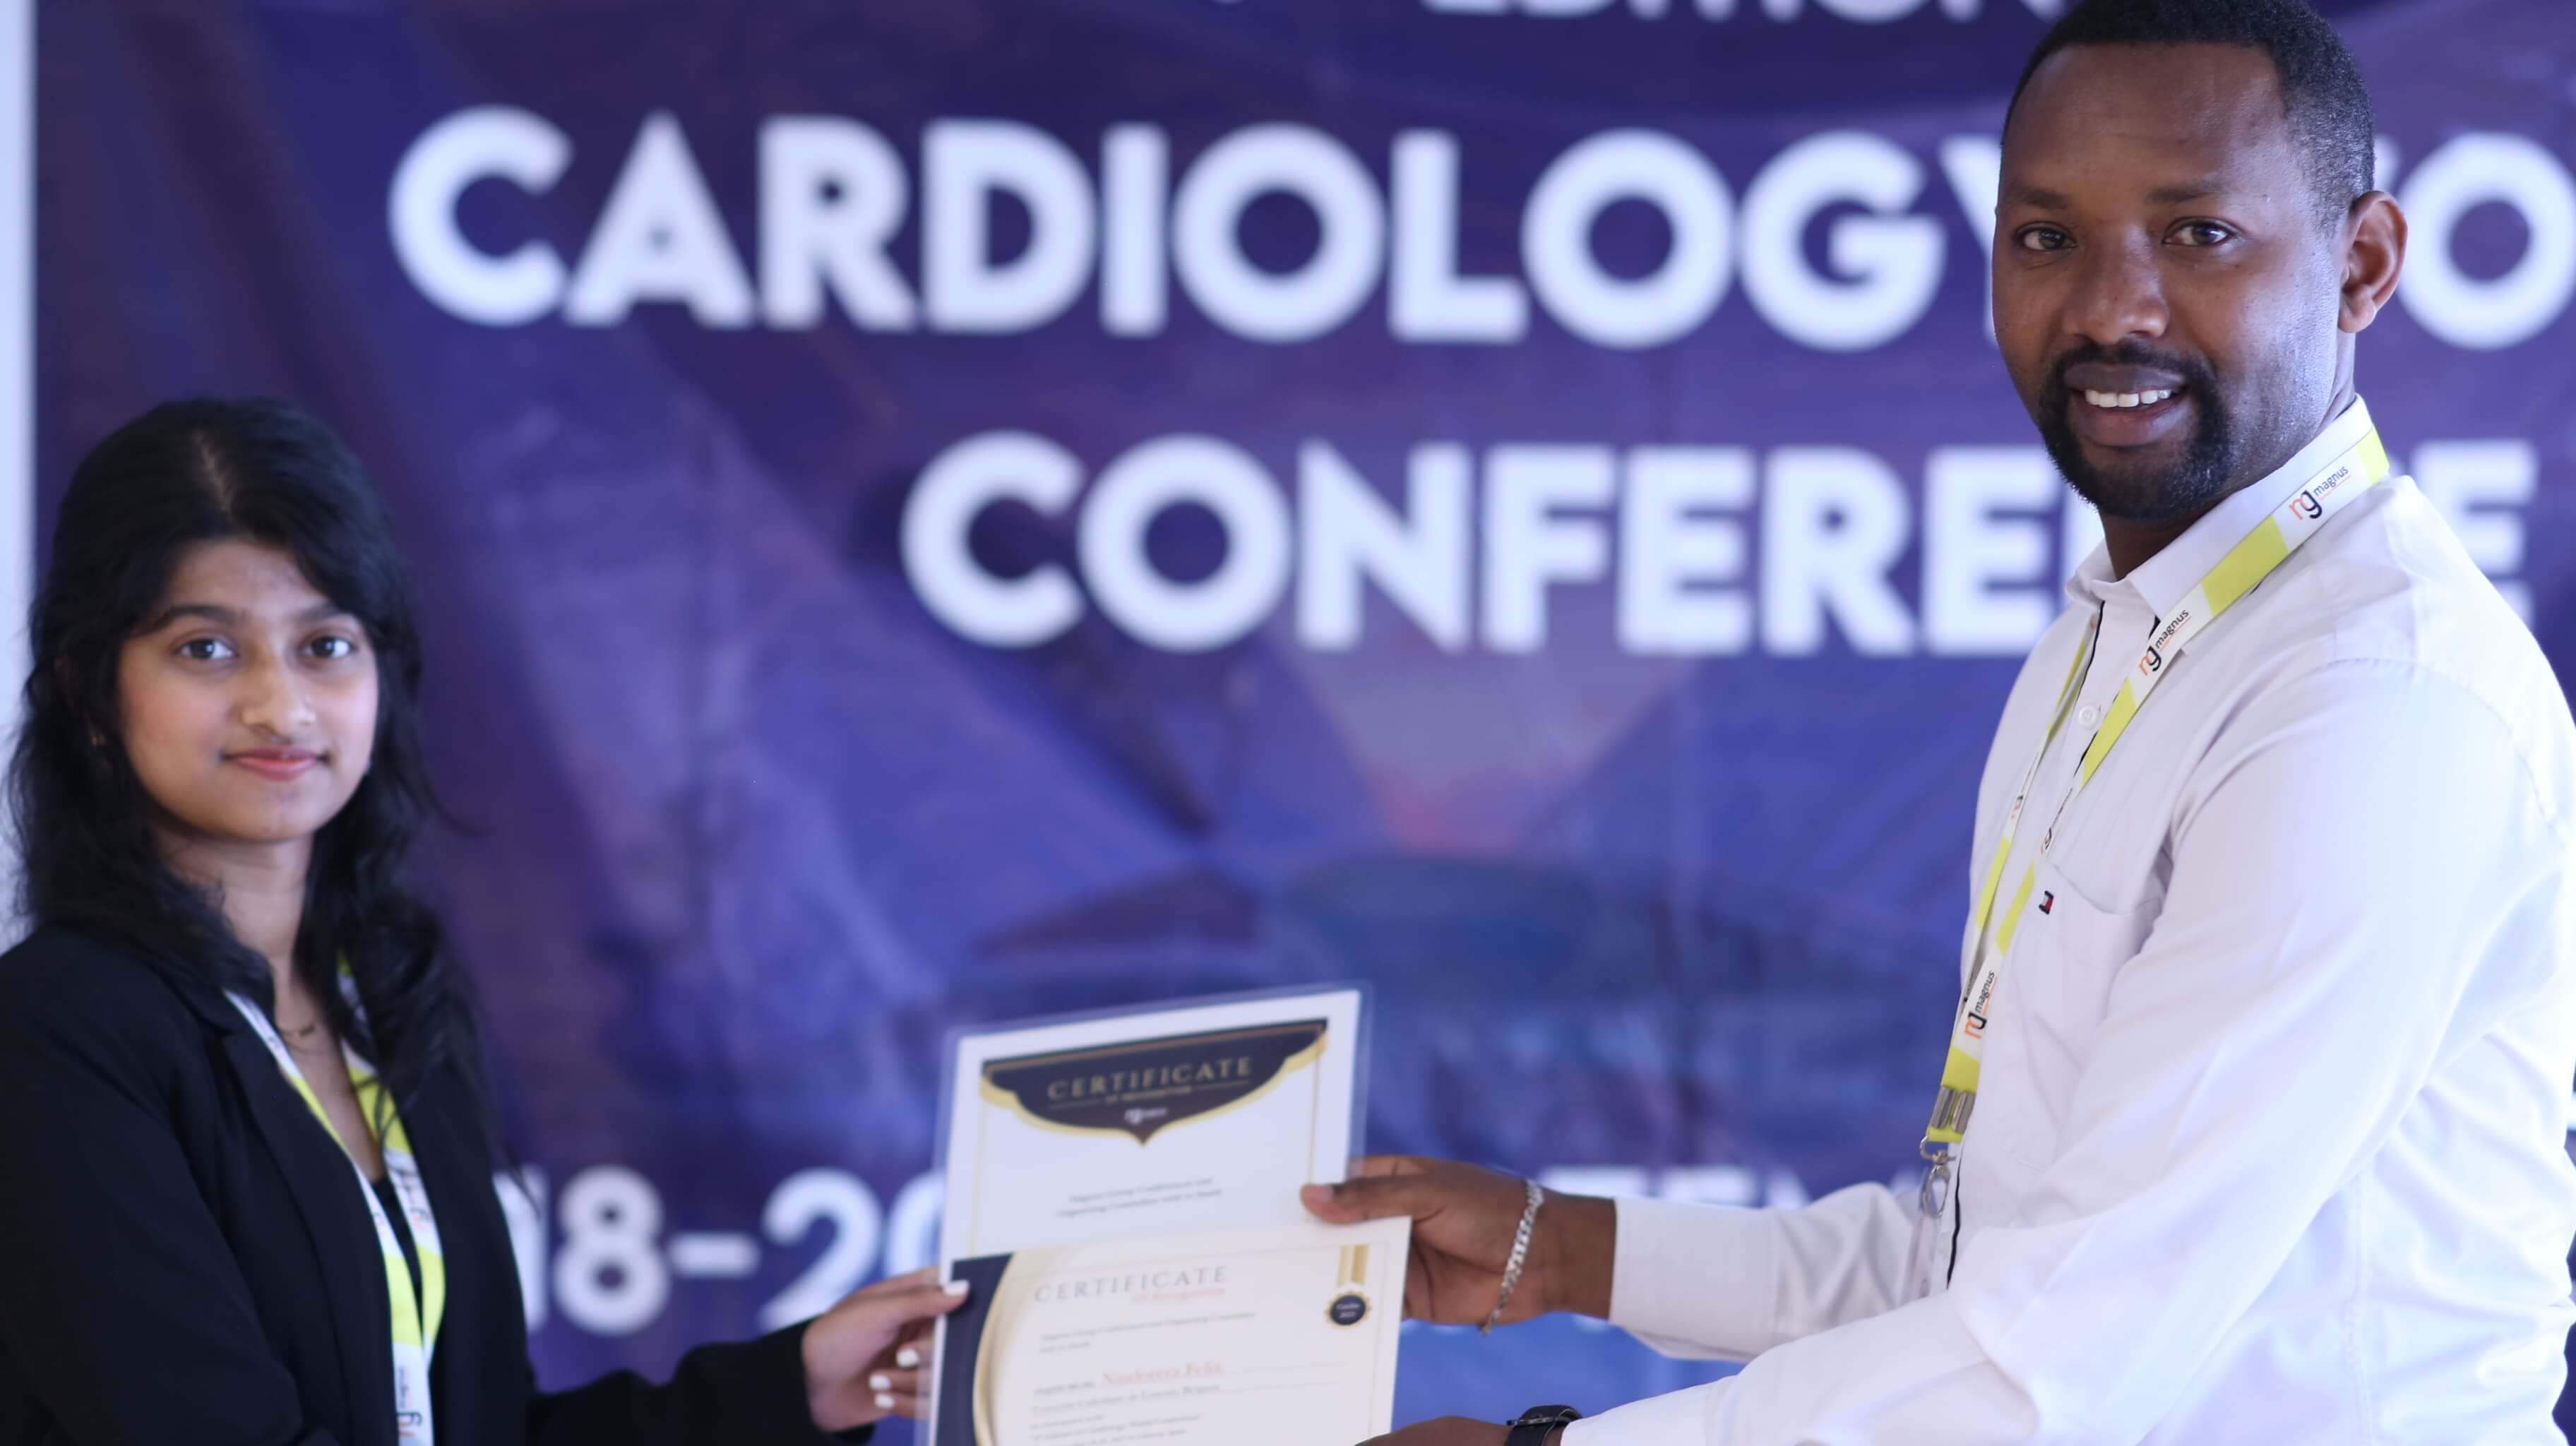 Cardiology Conferences